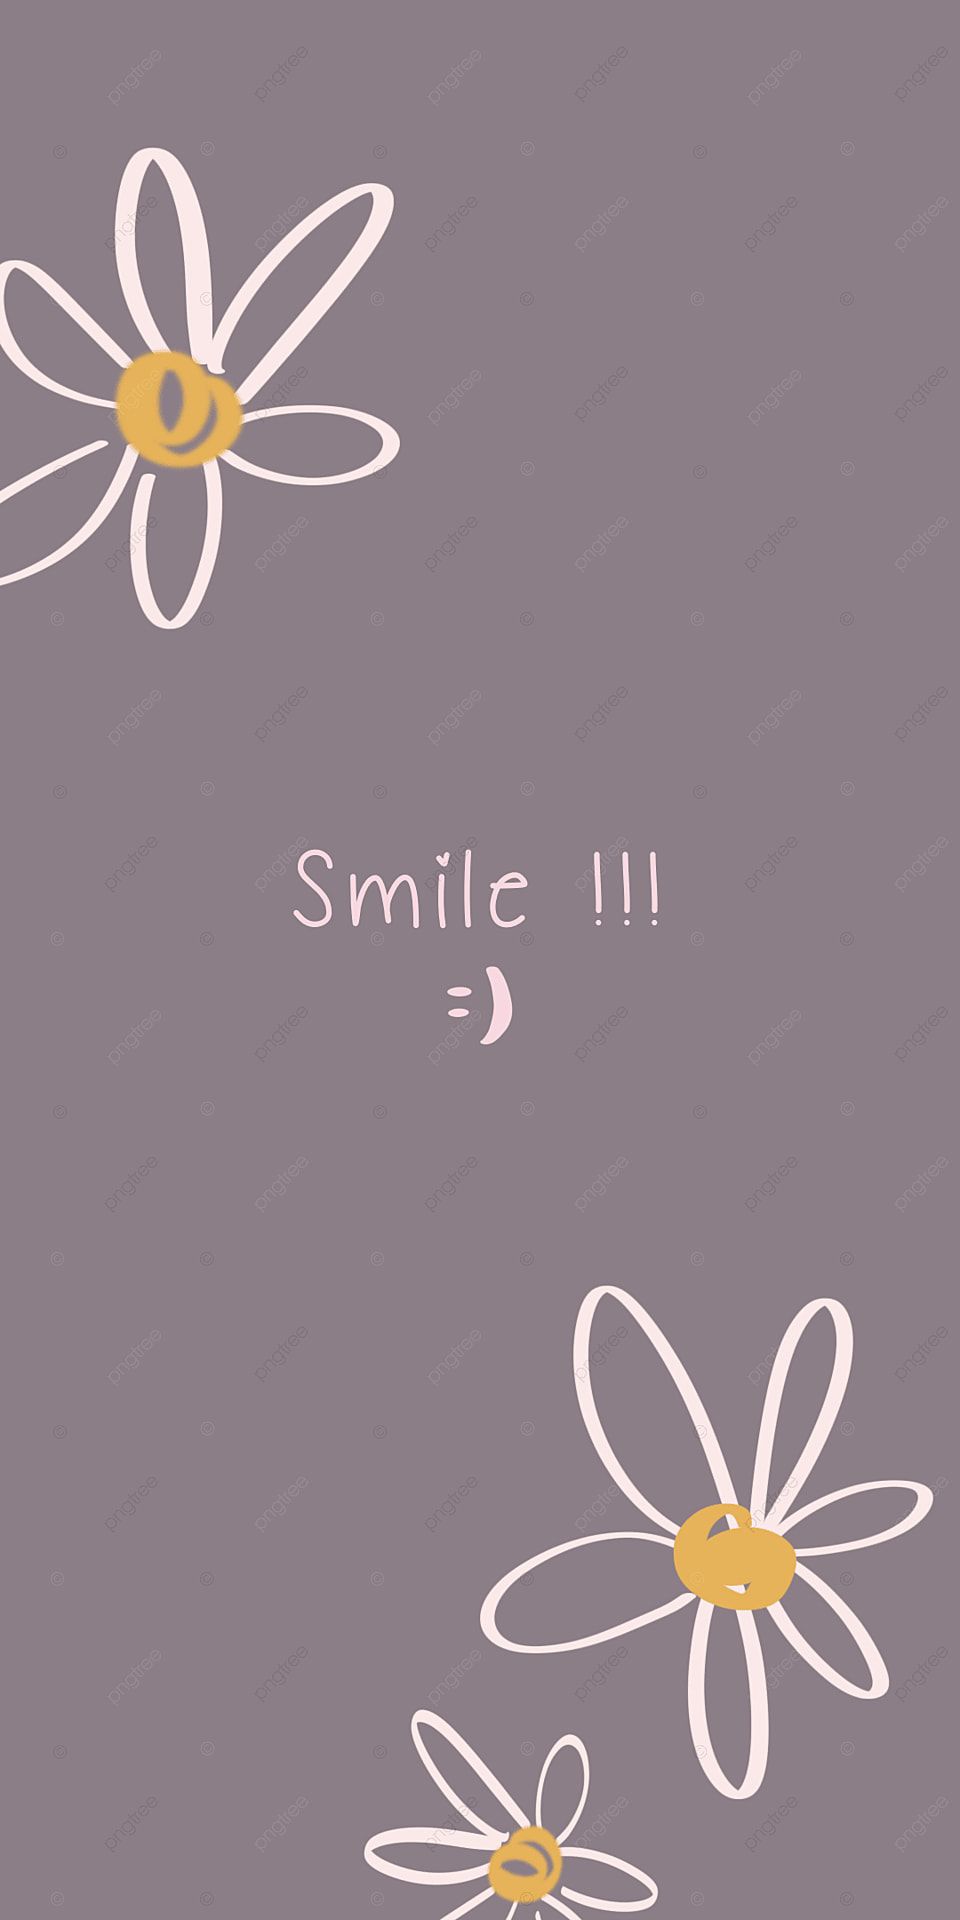 A poster with flowers and the words smile iii - Simple